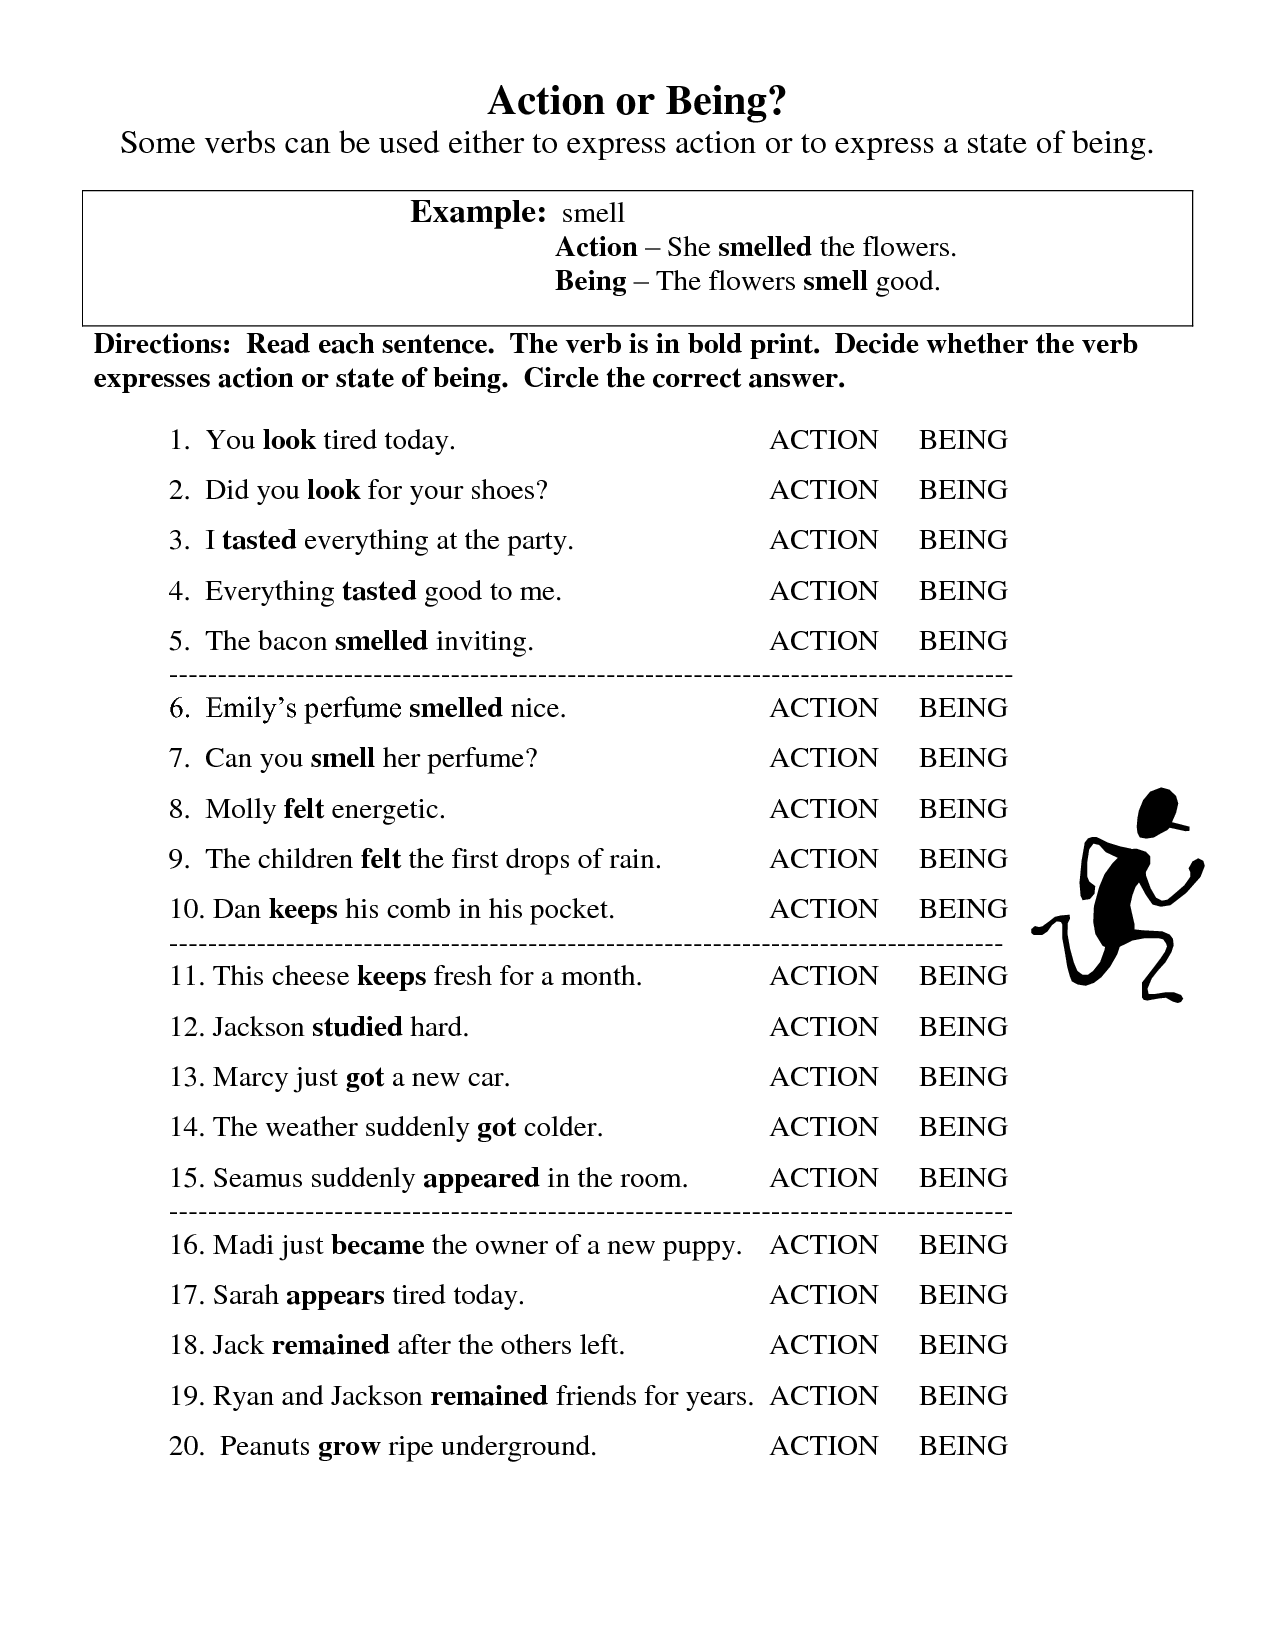 17 Best Images Of State Of Being Verbs Worksheet Action Linking Verb Worksheet Action And